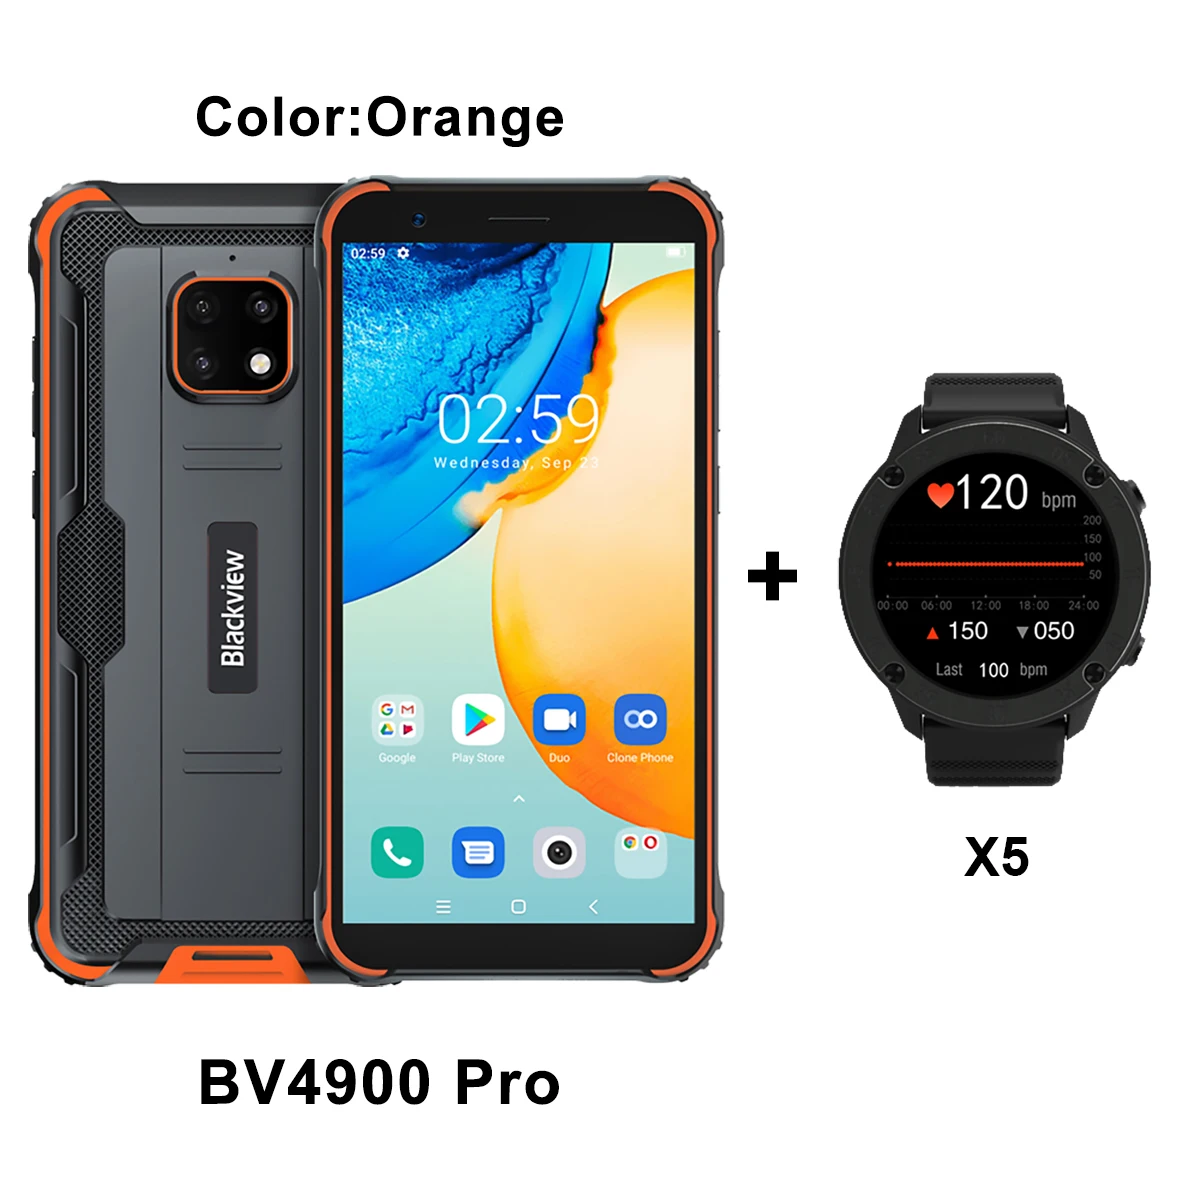 cheap gaming cell phone Blackview BV4900 Pro 4GB+64GB 5.7" IP68 Waterproof Rugged SmartPhone Octa Core Android 10  5580mAh NFC  4G Mobile Phone samsung dual sim best phone Android Phones